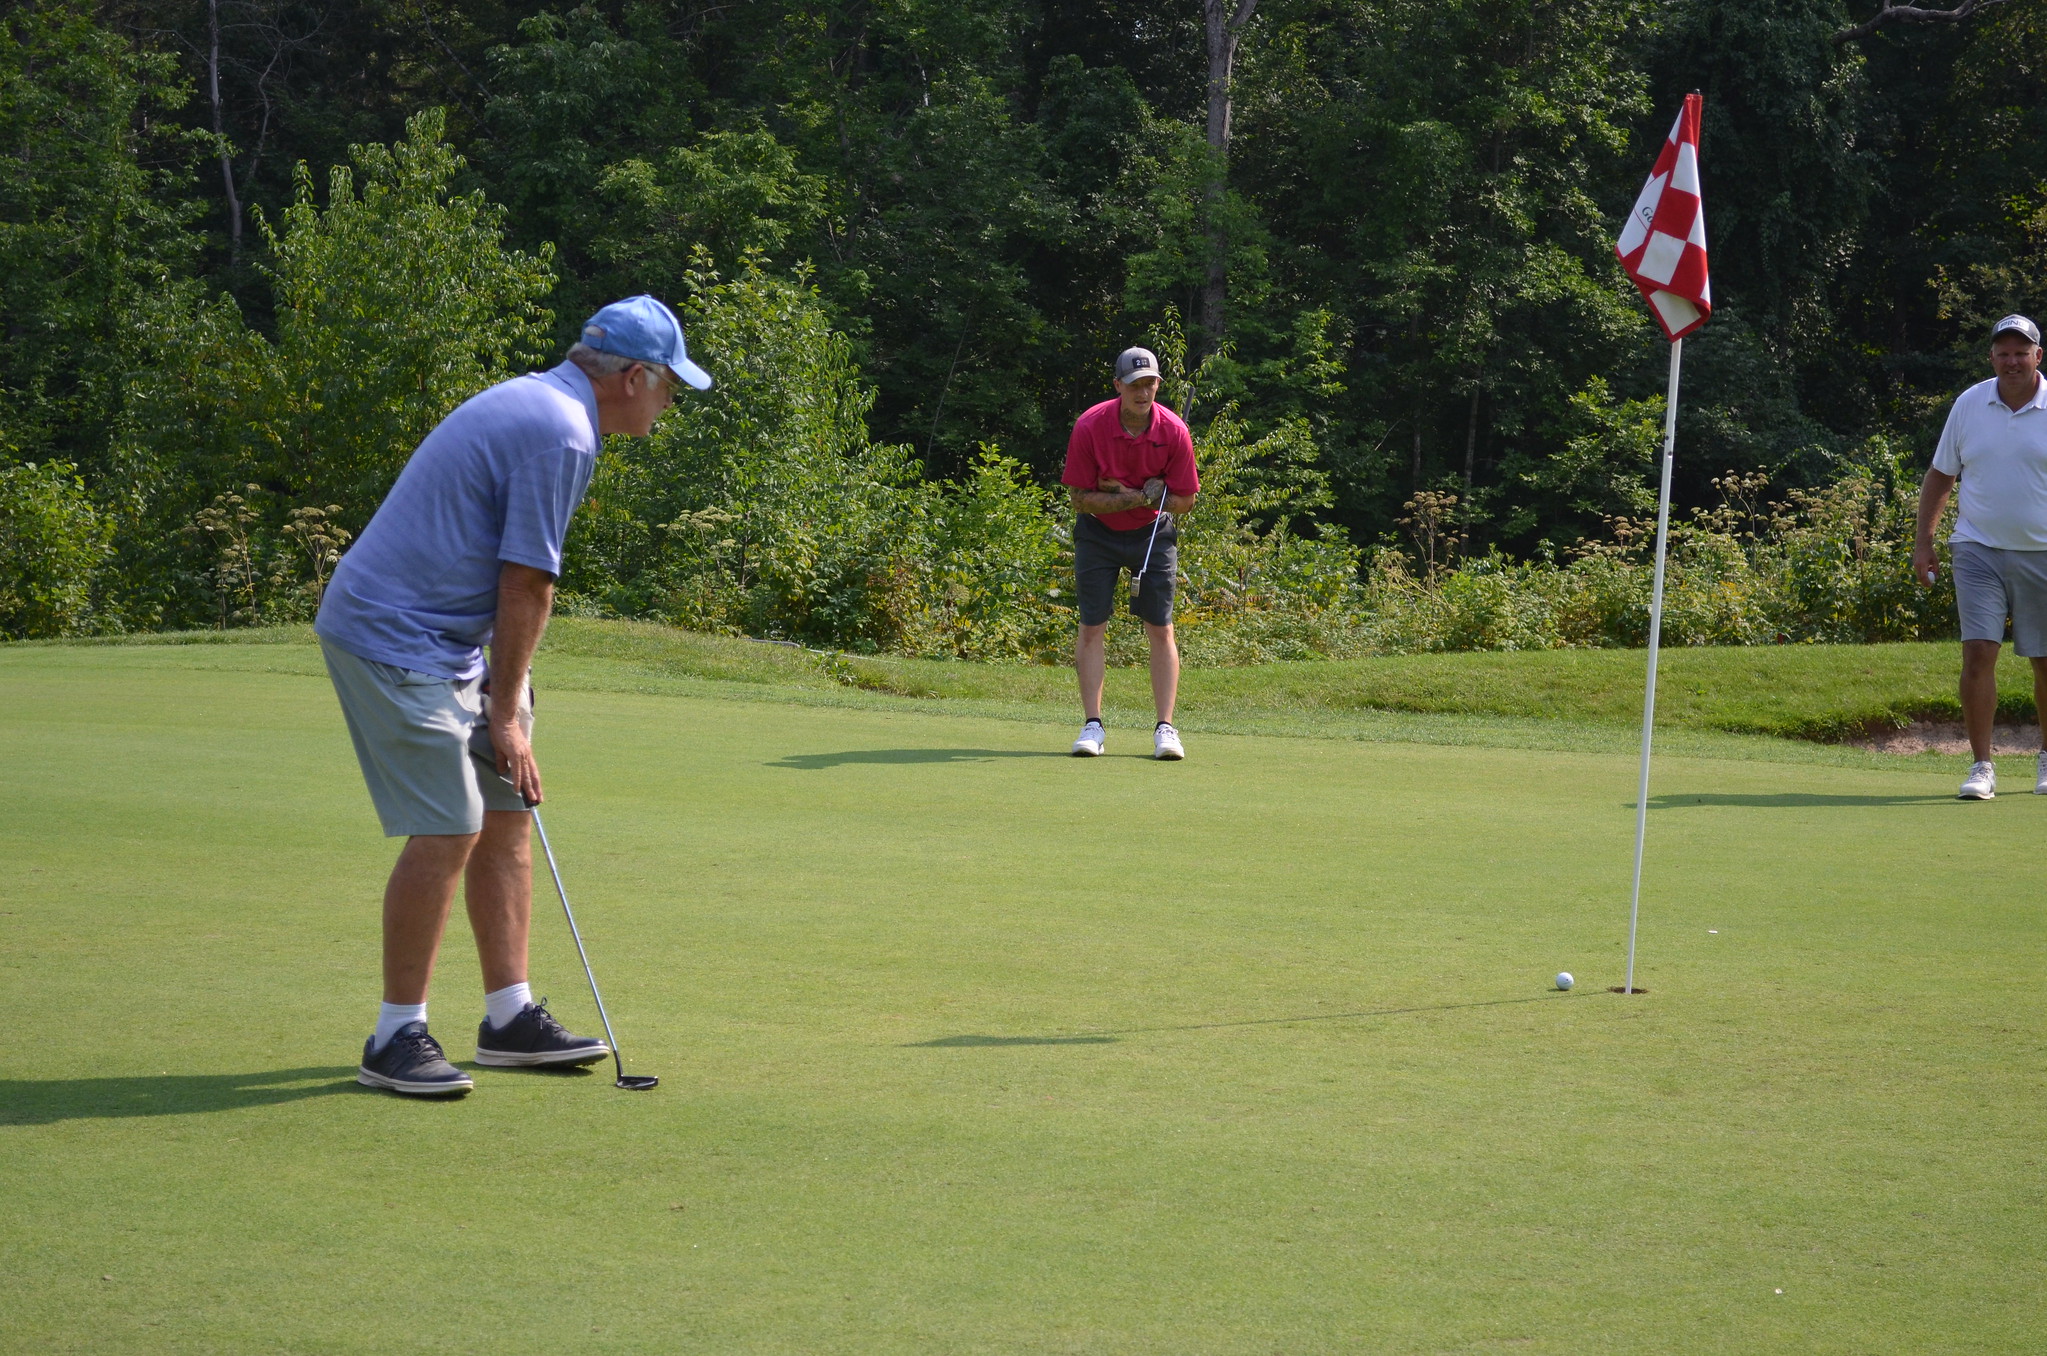 Golf Day in Borden, ON Image